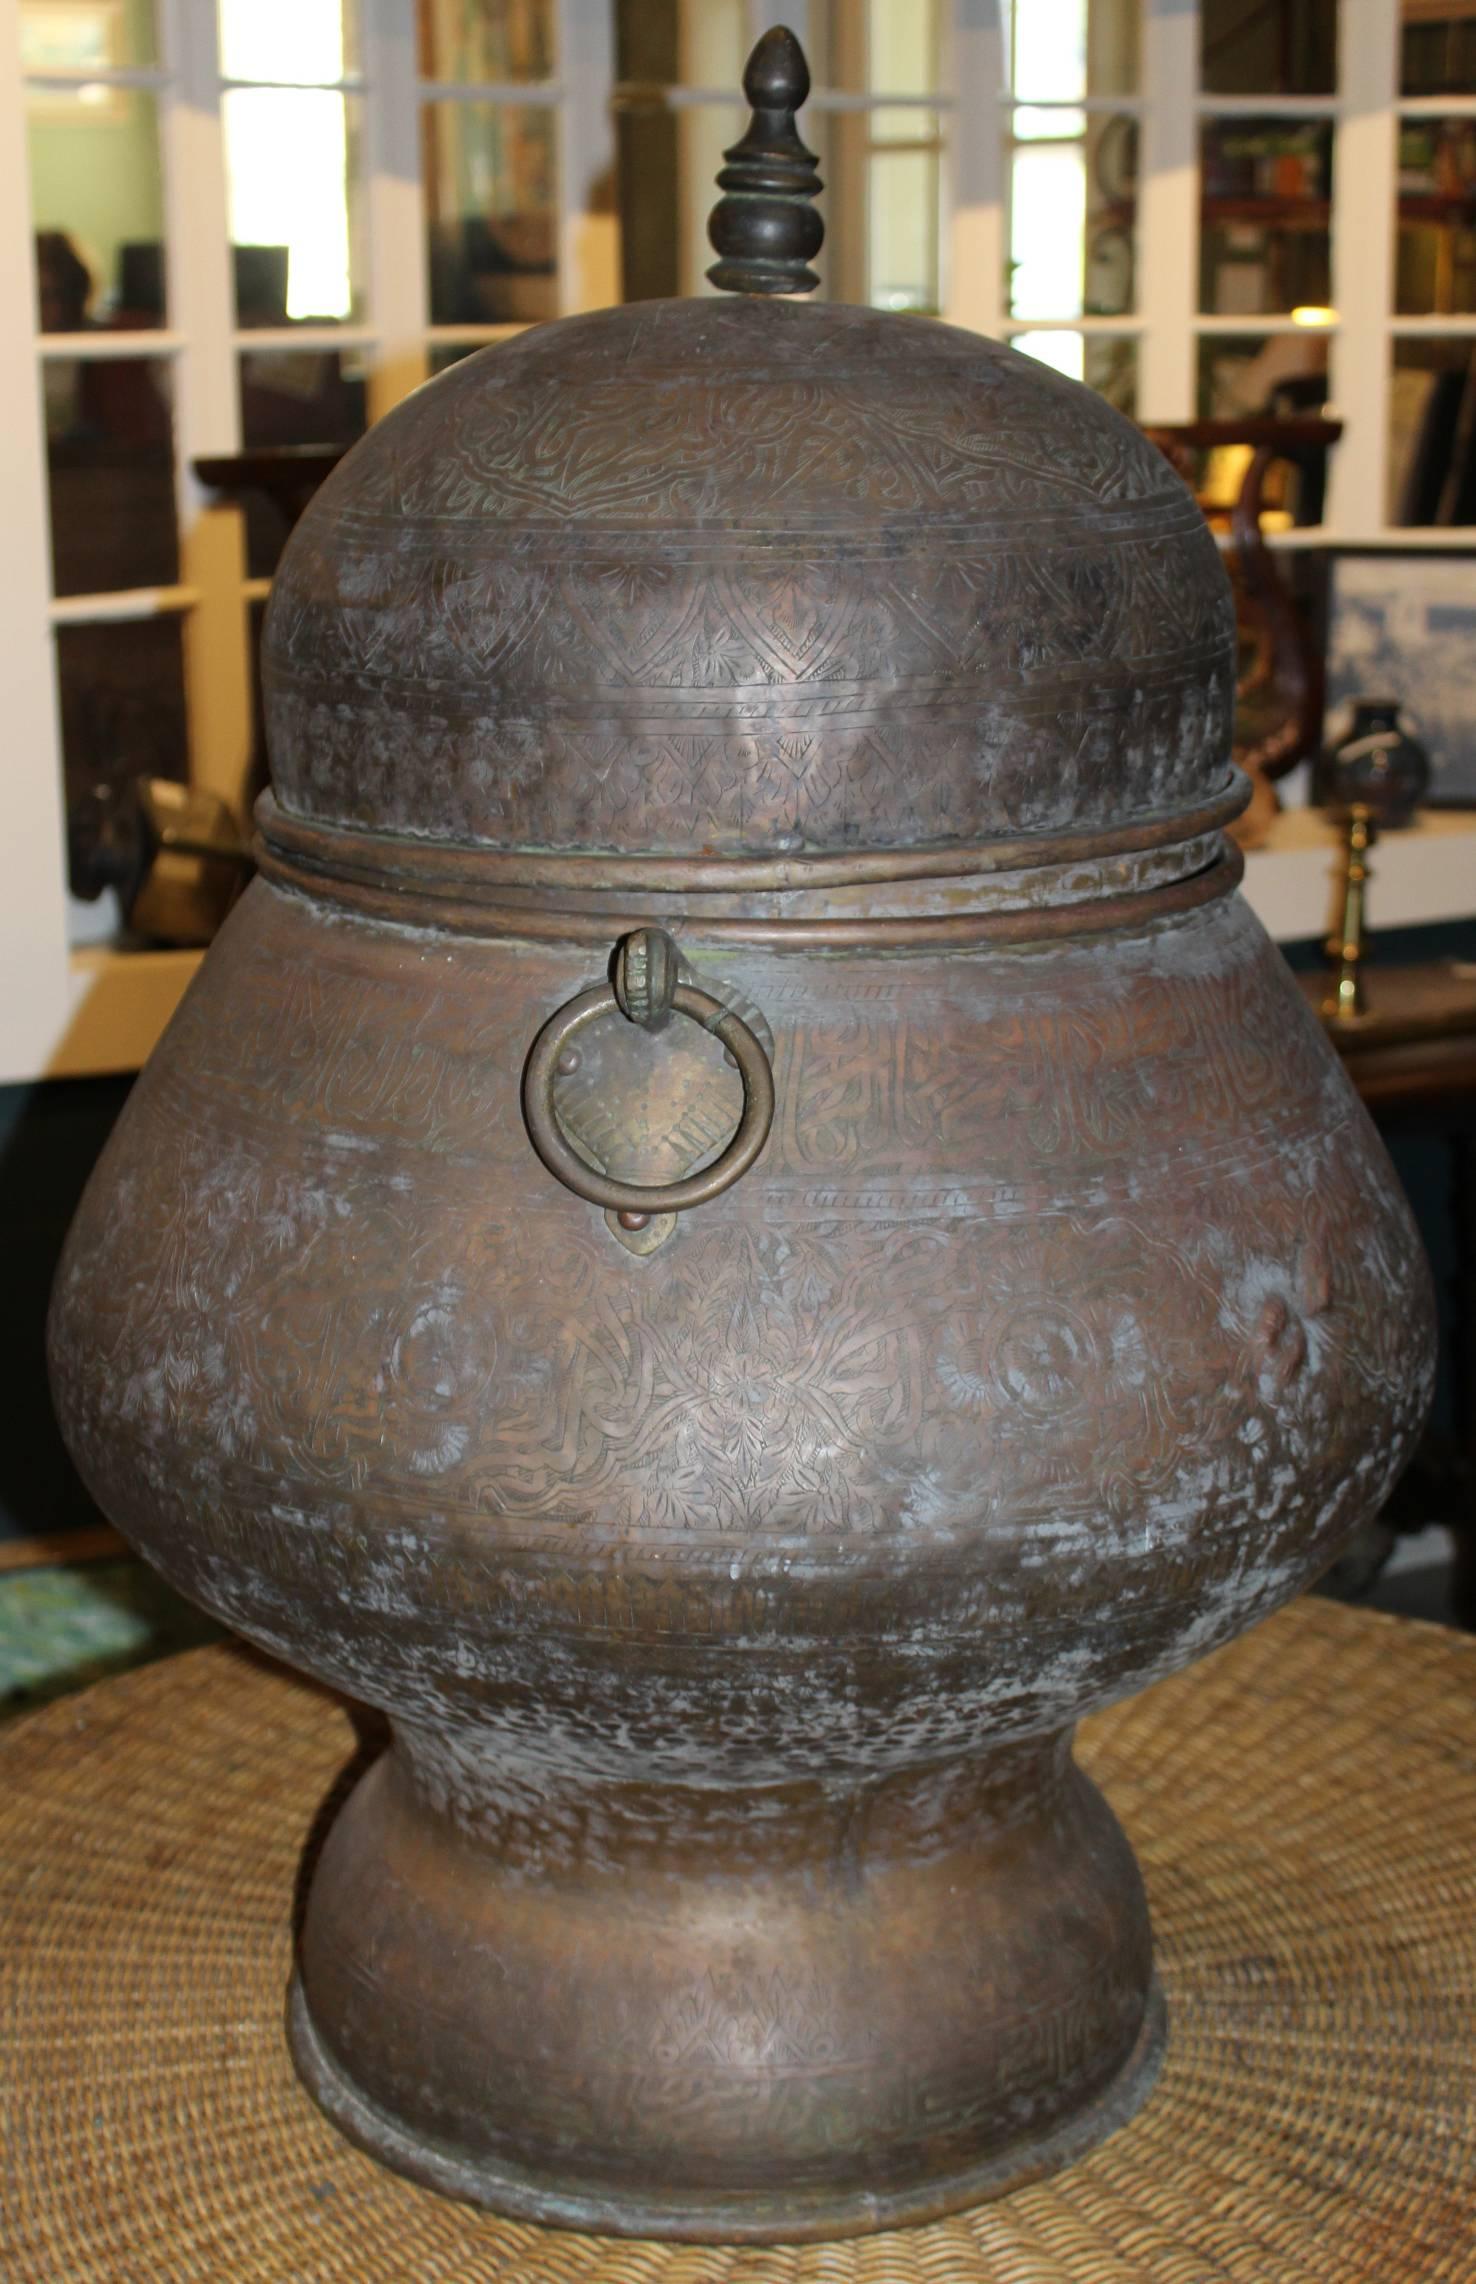 A fine Middle Eastern or Persian covered handled copper palace urn with great form, chased with hand-hammered geometric and foliate designs and decoration, the cover with turned finial and body fitted with two ring form handles. Great overall patina.